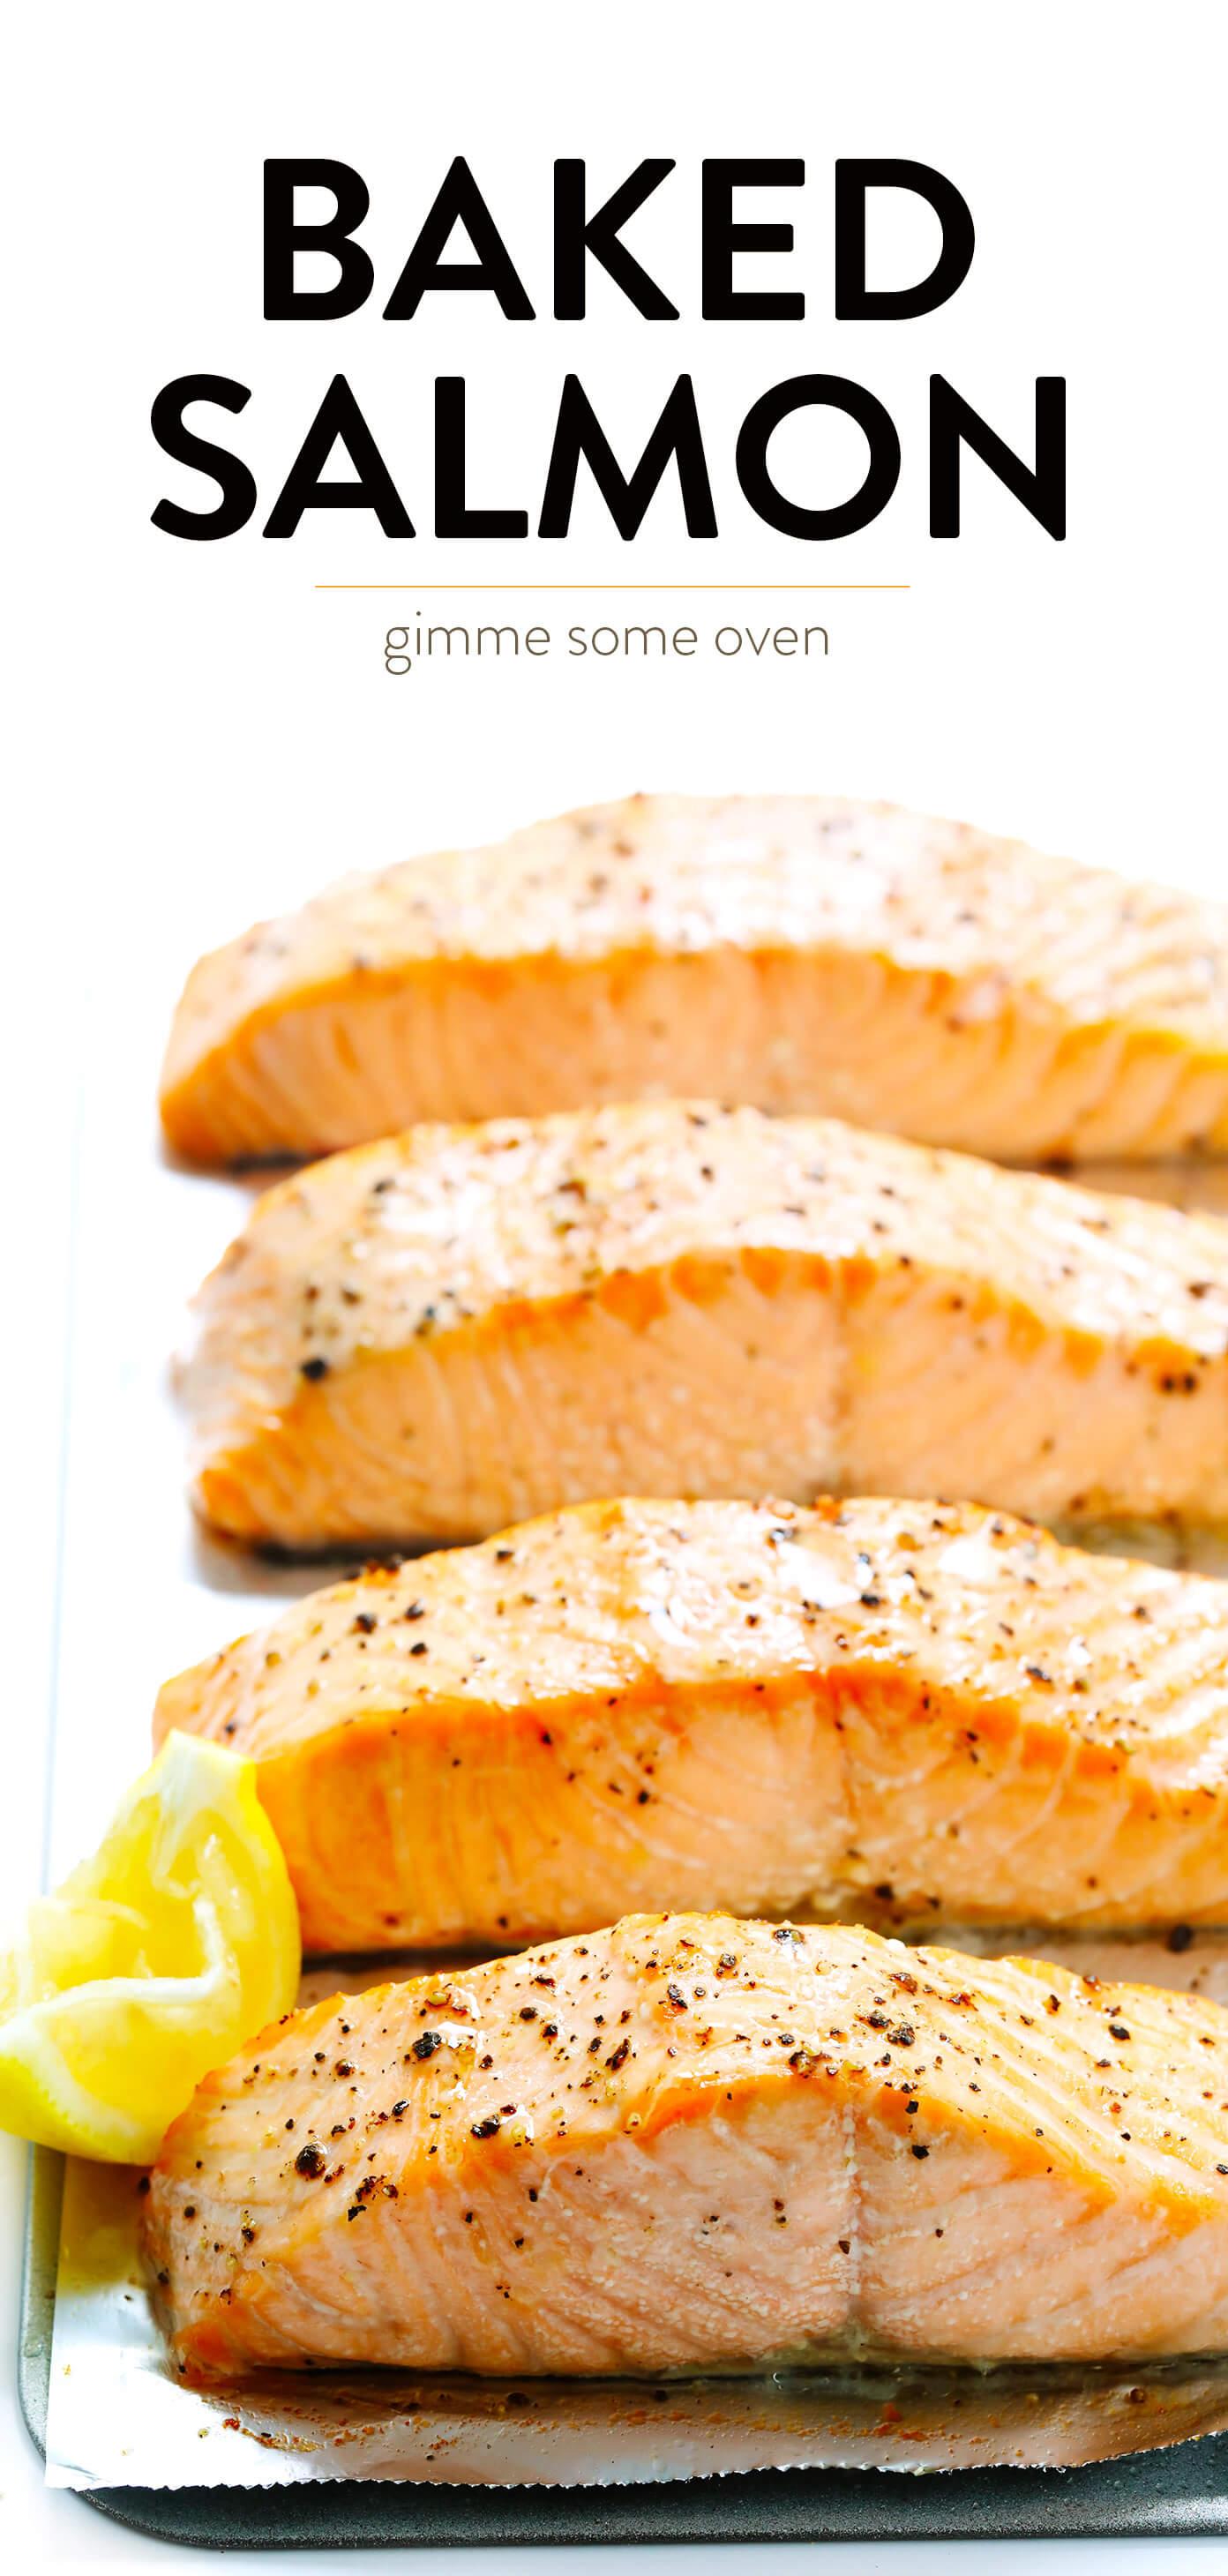 Baked Salmon Recipe | Gimme Some Oven